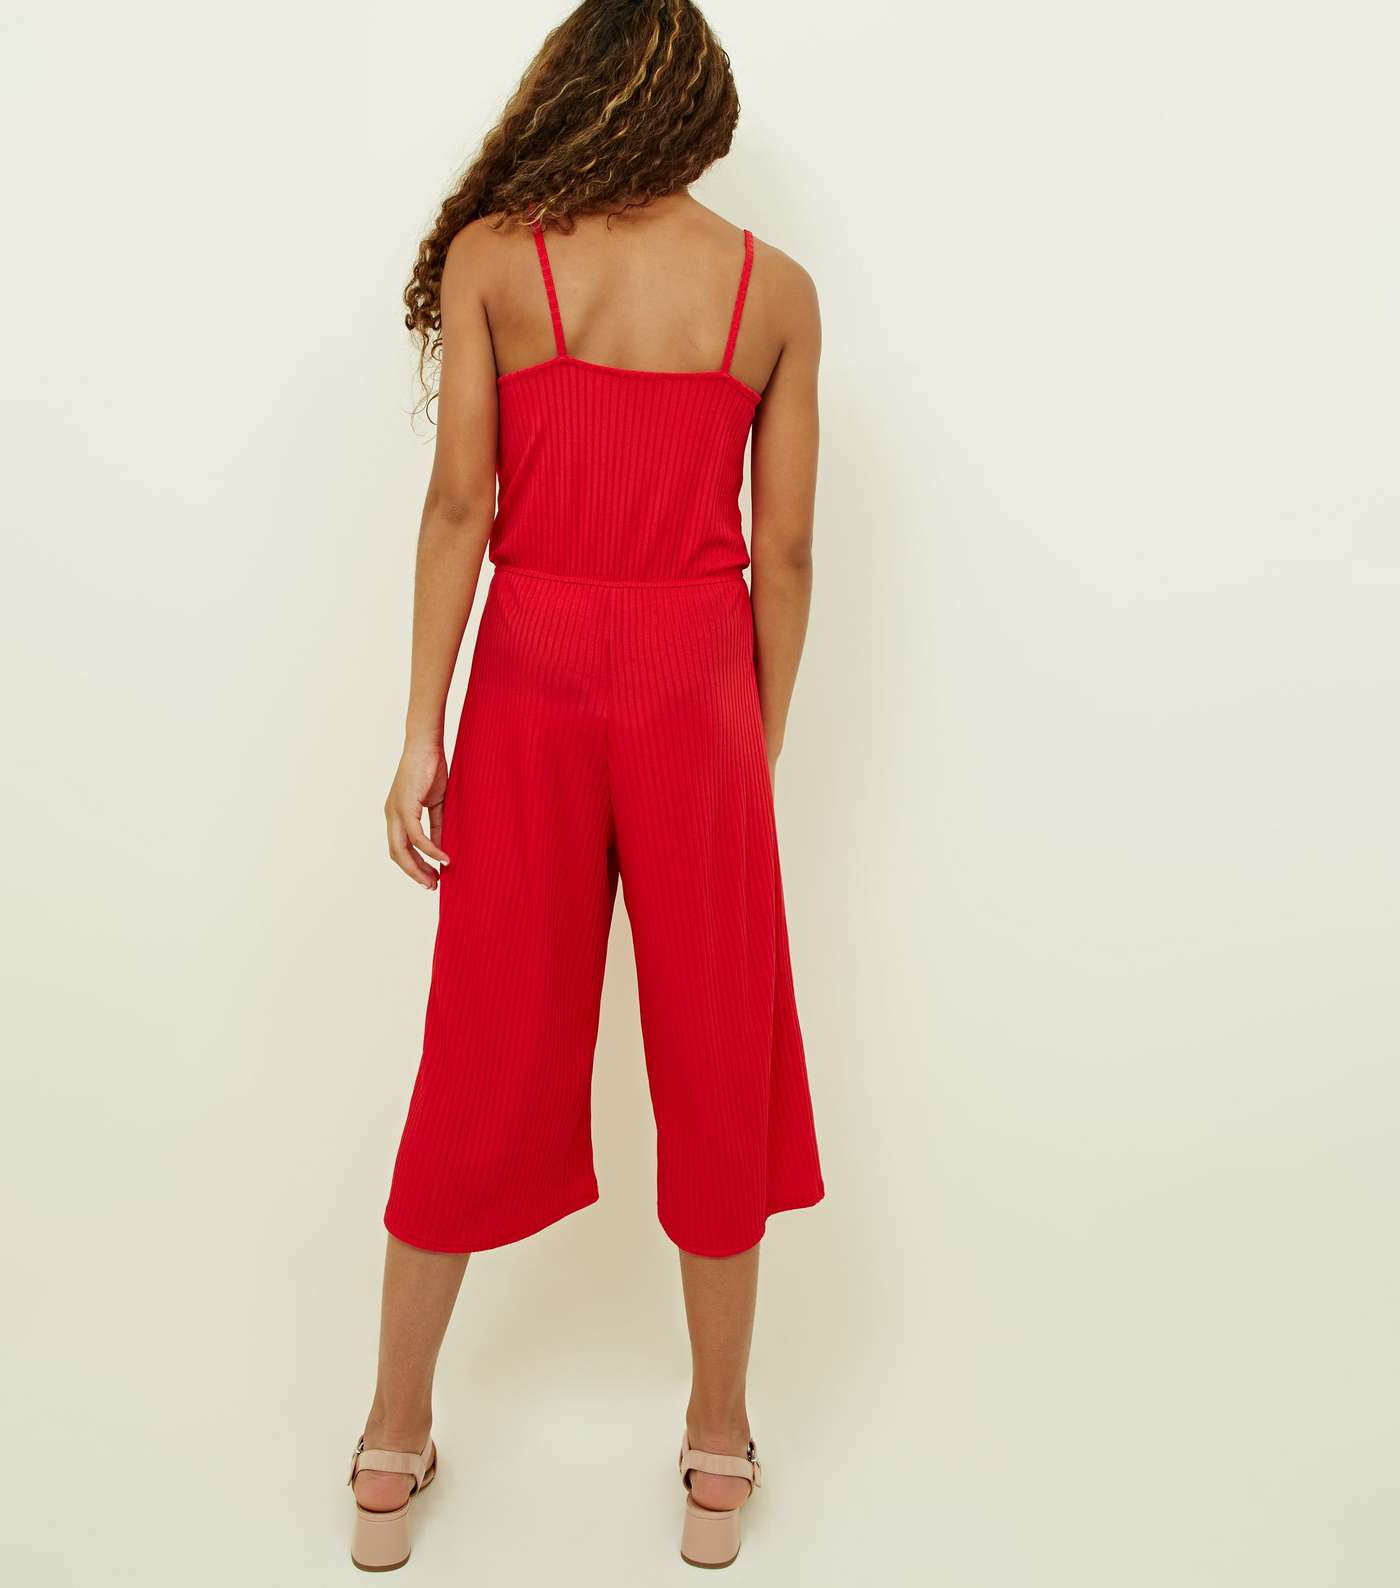 Girls Red Ribbed Strappy Jumpsuit Image 3